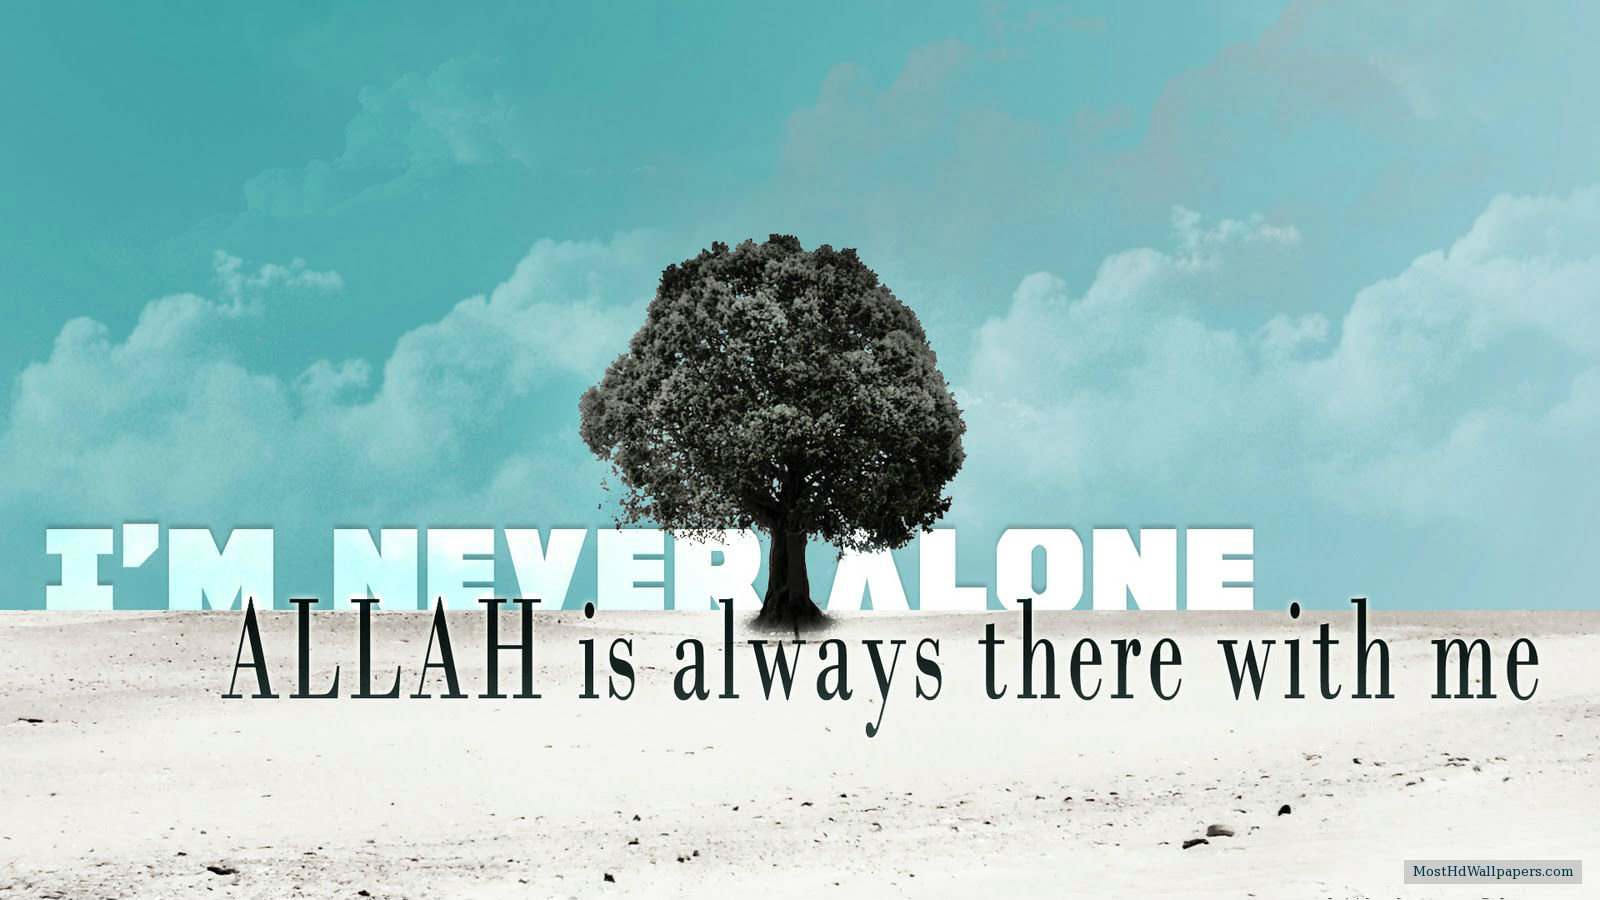 Islamic Wallpapers With Quotes - Wallpapersafari